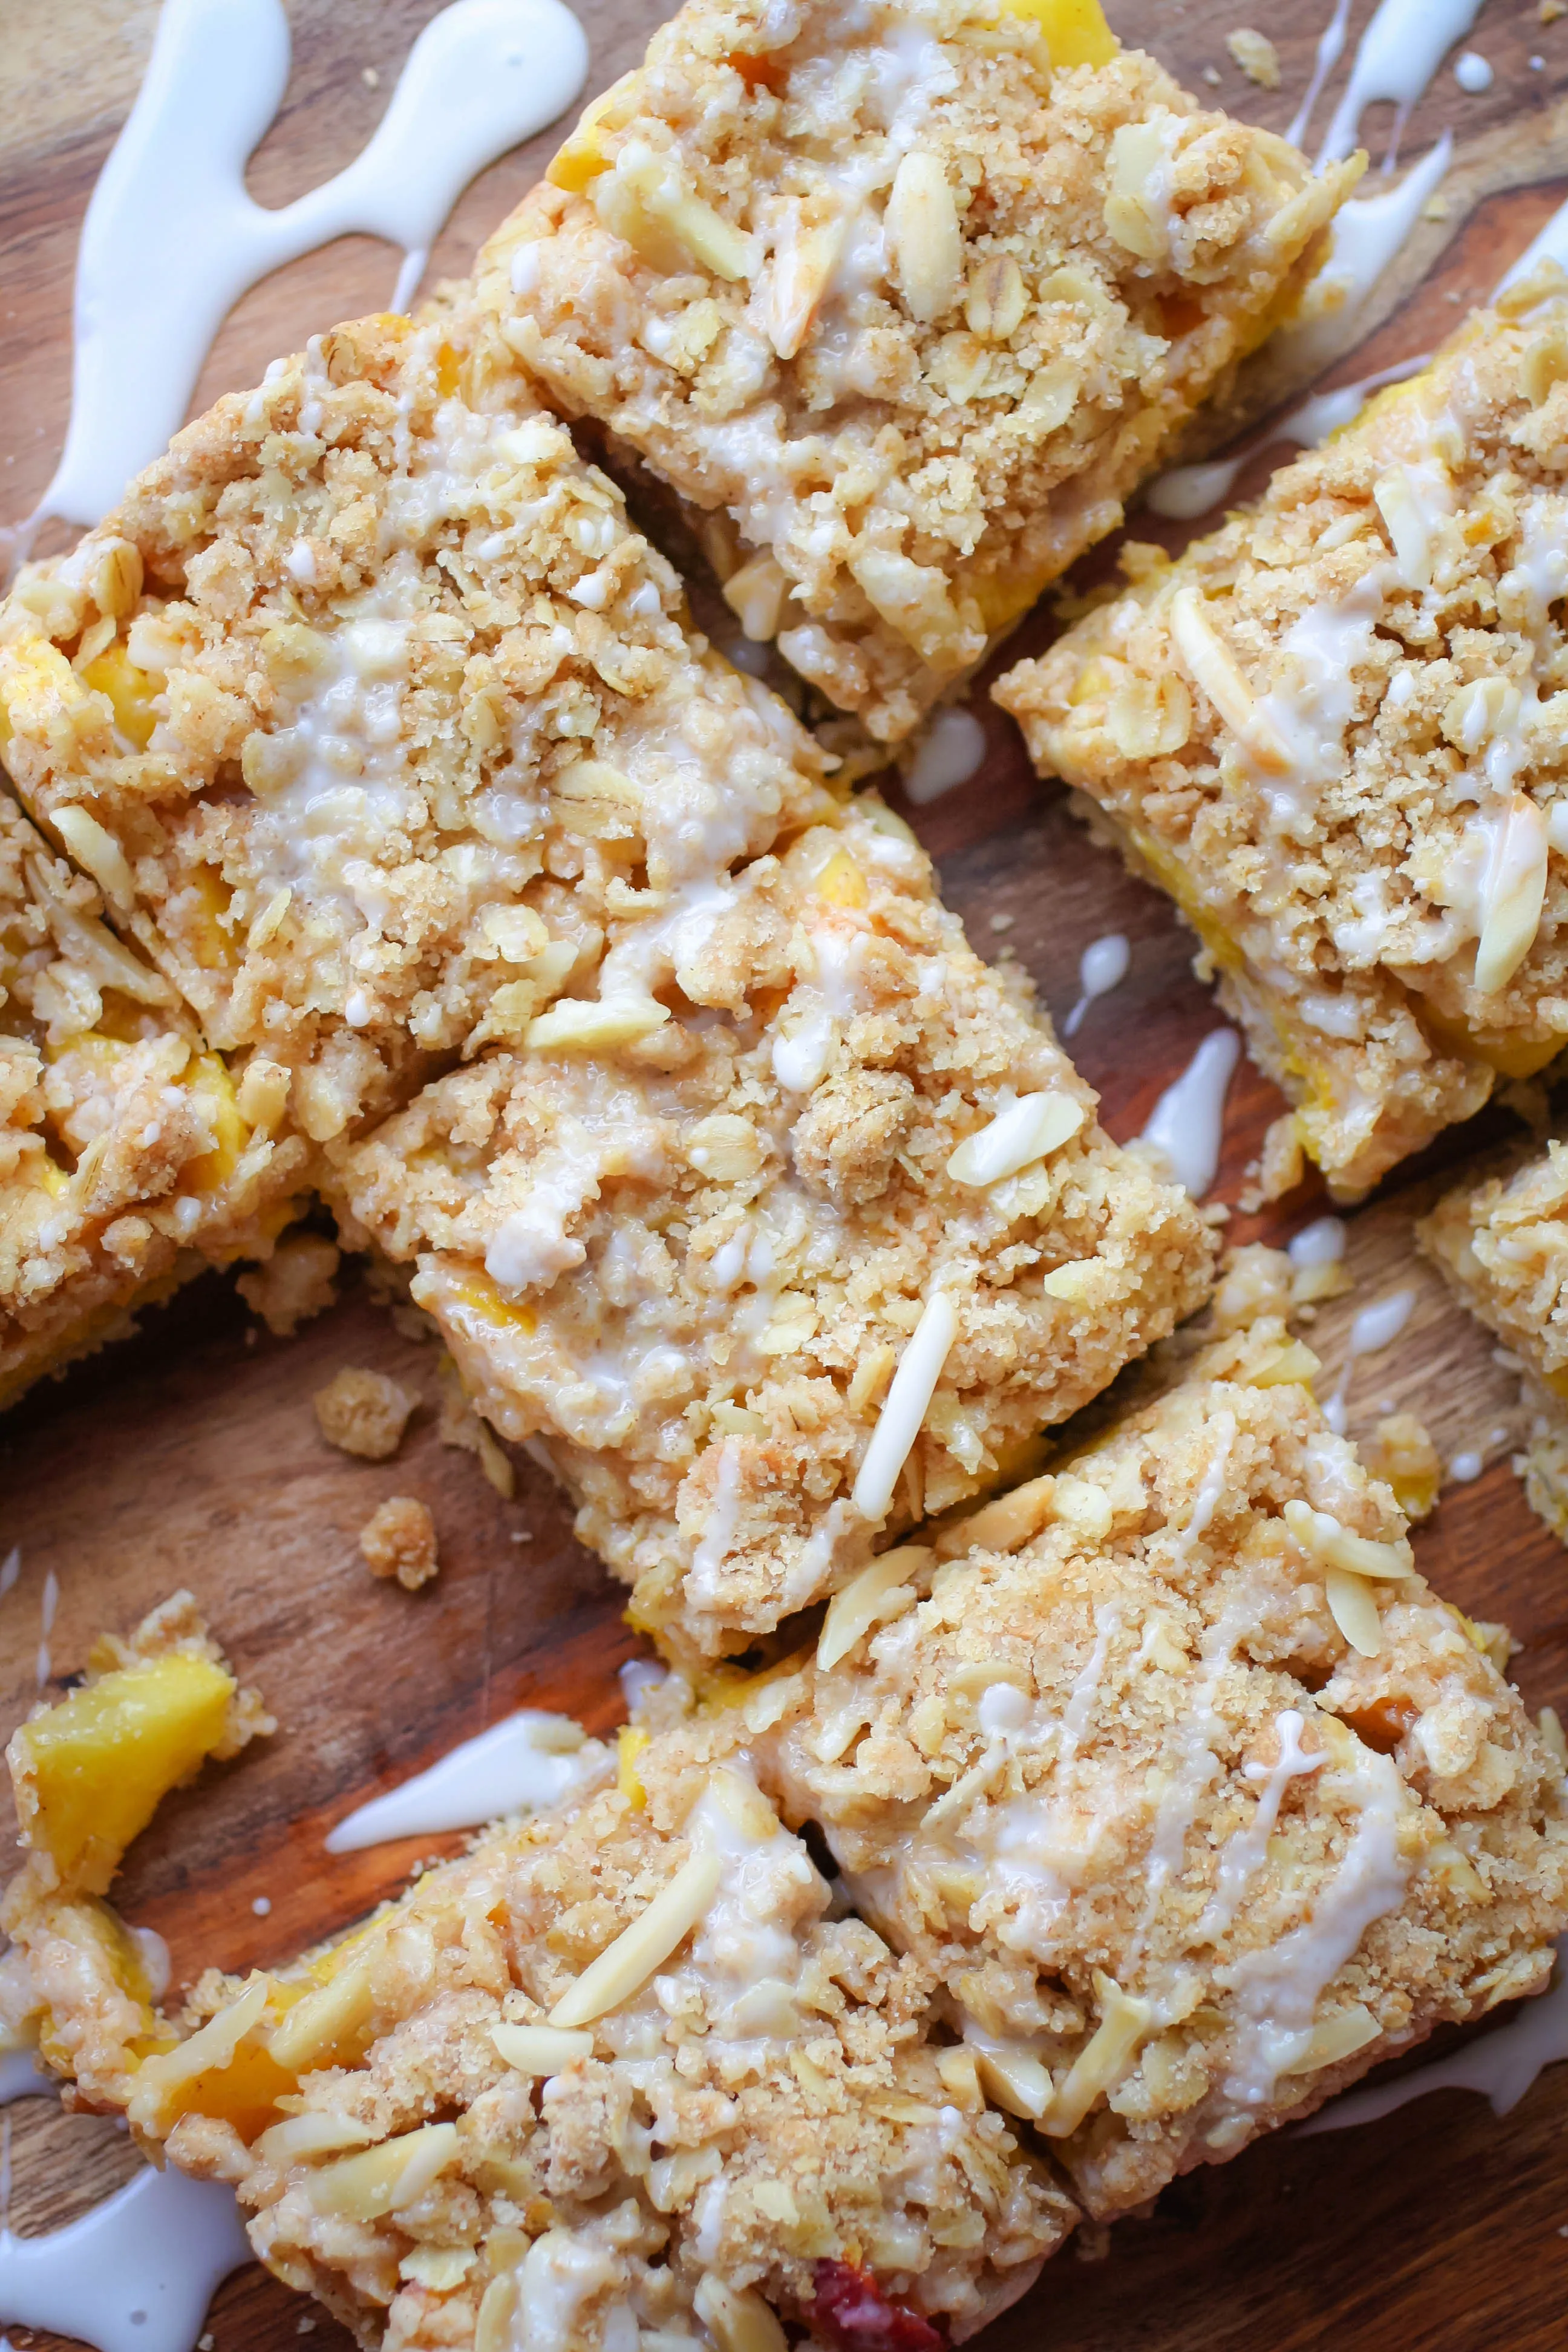 Peach Crumble Squares with Bourbon Glaze are lovely summertime treats. You'll love these Peach Crumble Squares with Bourbon Glaze for your next dessert idea.